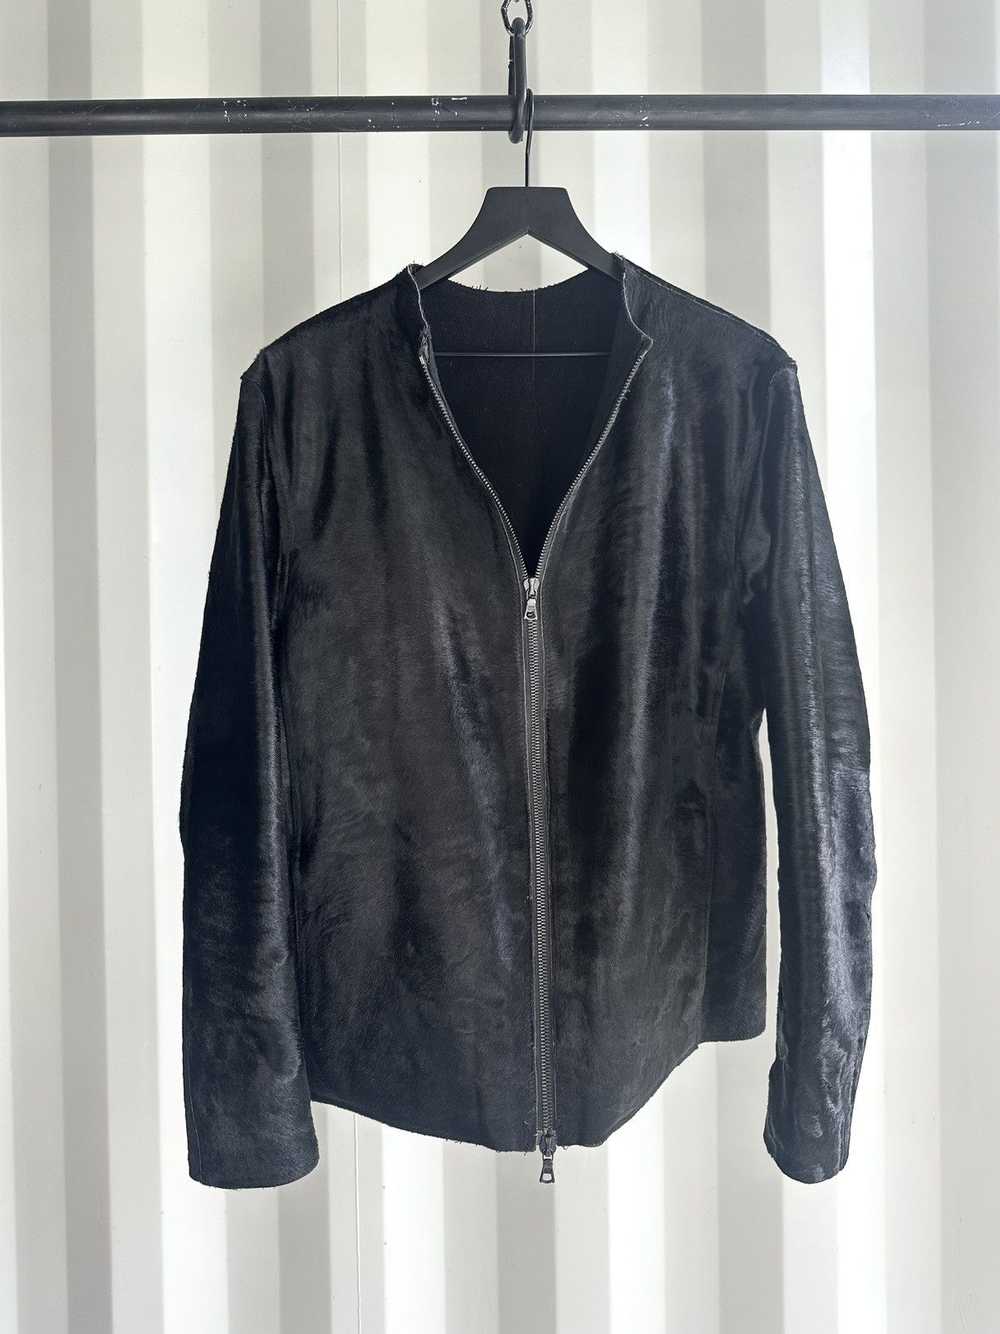 Gucci × Tom Ford Pony Hair Jacket - image 2